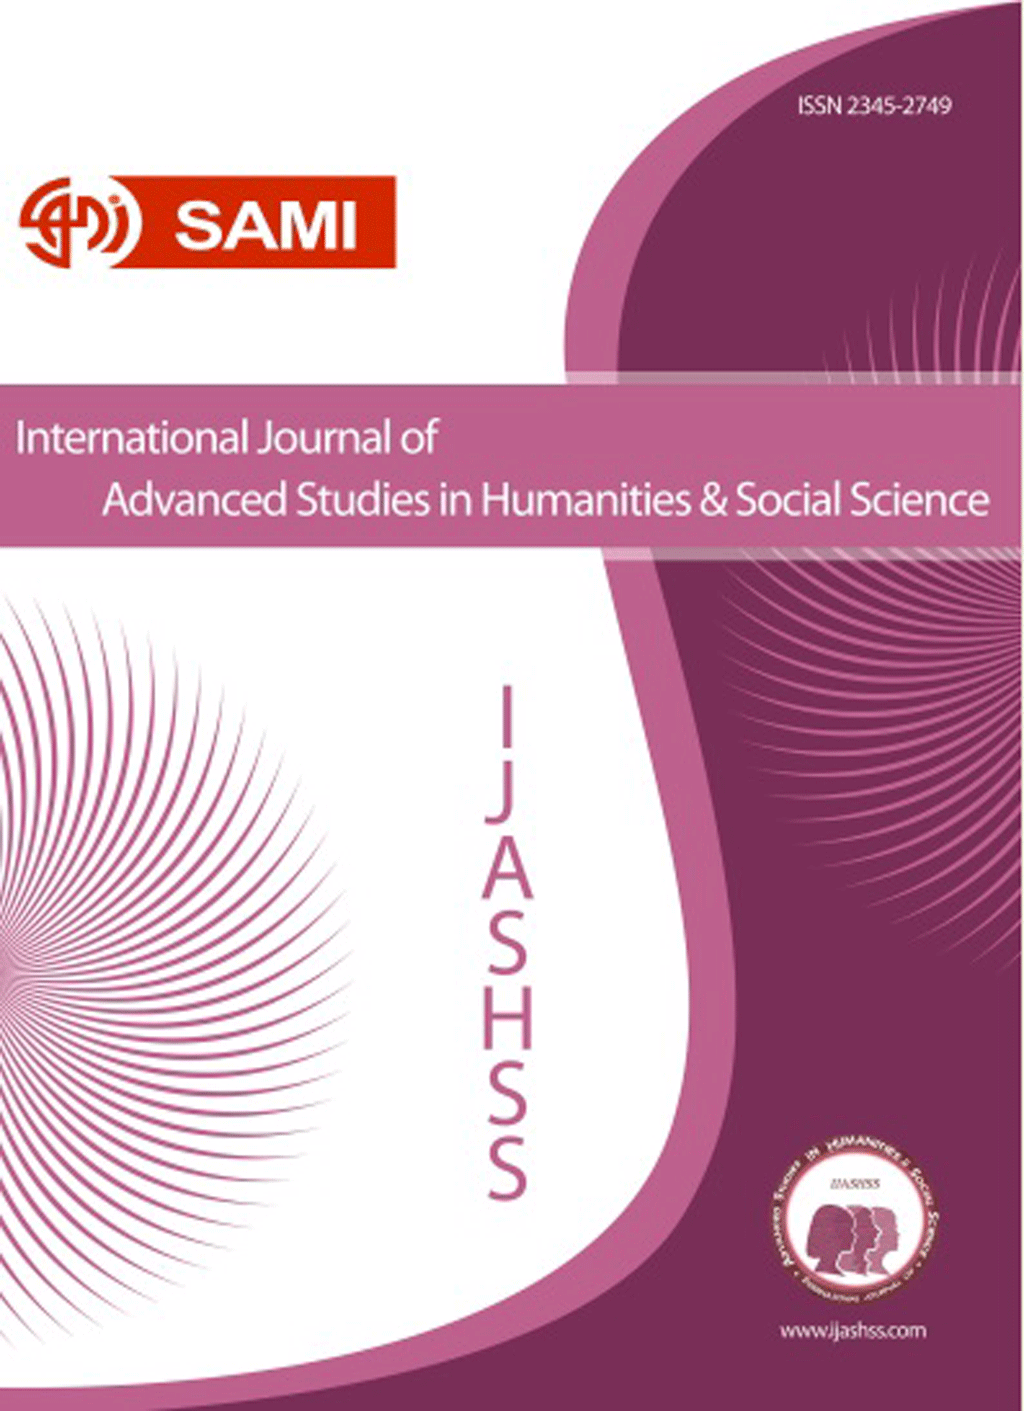 International Journal of Advanced Studies in Humanities and Social Science - October 2019, Volume 9 -  Issue 4